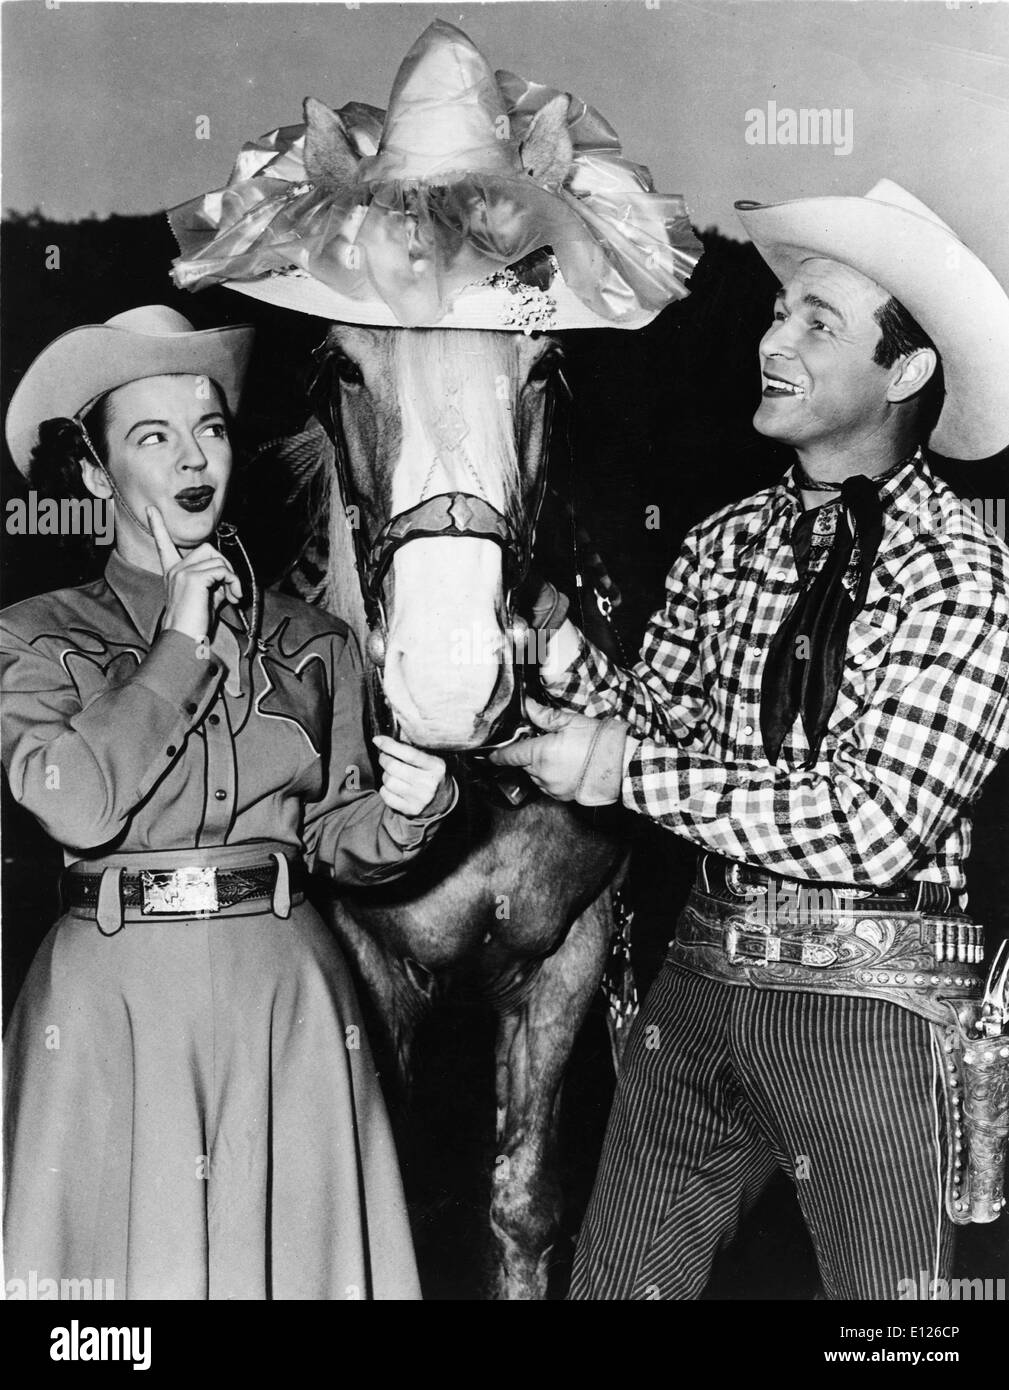 Jan 02, 2007; Los Angeles, CA, USA; LEONARD FRANKLIN SLYE aka ROY ROGERS (November 5, 1911 Ð July 6, 1998), who became famous as Roy Rogers, was a singer and cowboy actor. He and his third wife DALE EVANS, his golden palomino TRIGGER, and his German shepherd Bullet were featured in over one hundred movies and The Roy Rogers Show which ran on radio for nine years before moving to television from 1951 through 1964. His productions usually featured two sidekicks, Pat Brady (who drove a jeep called 'Nellybelle') and the crotchety bushwhacker Gabby Hayes. Roy's nickname was 'King of the Cowboys' Stock Photo